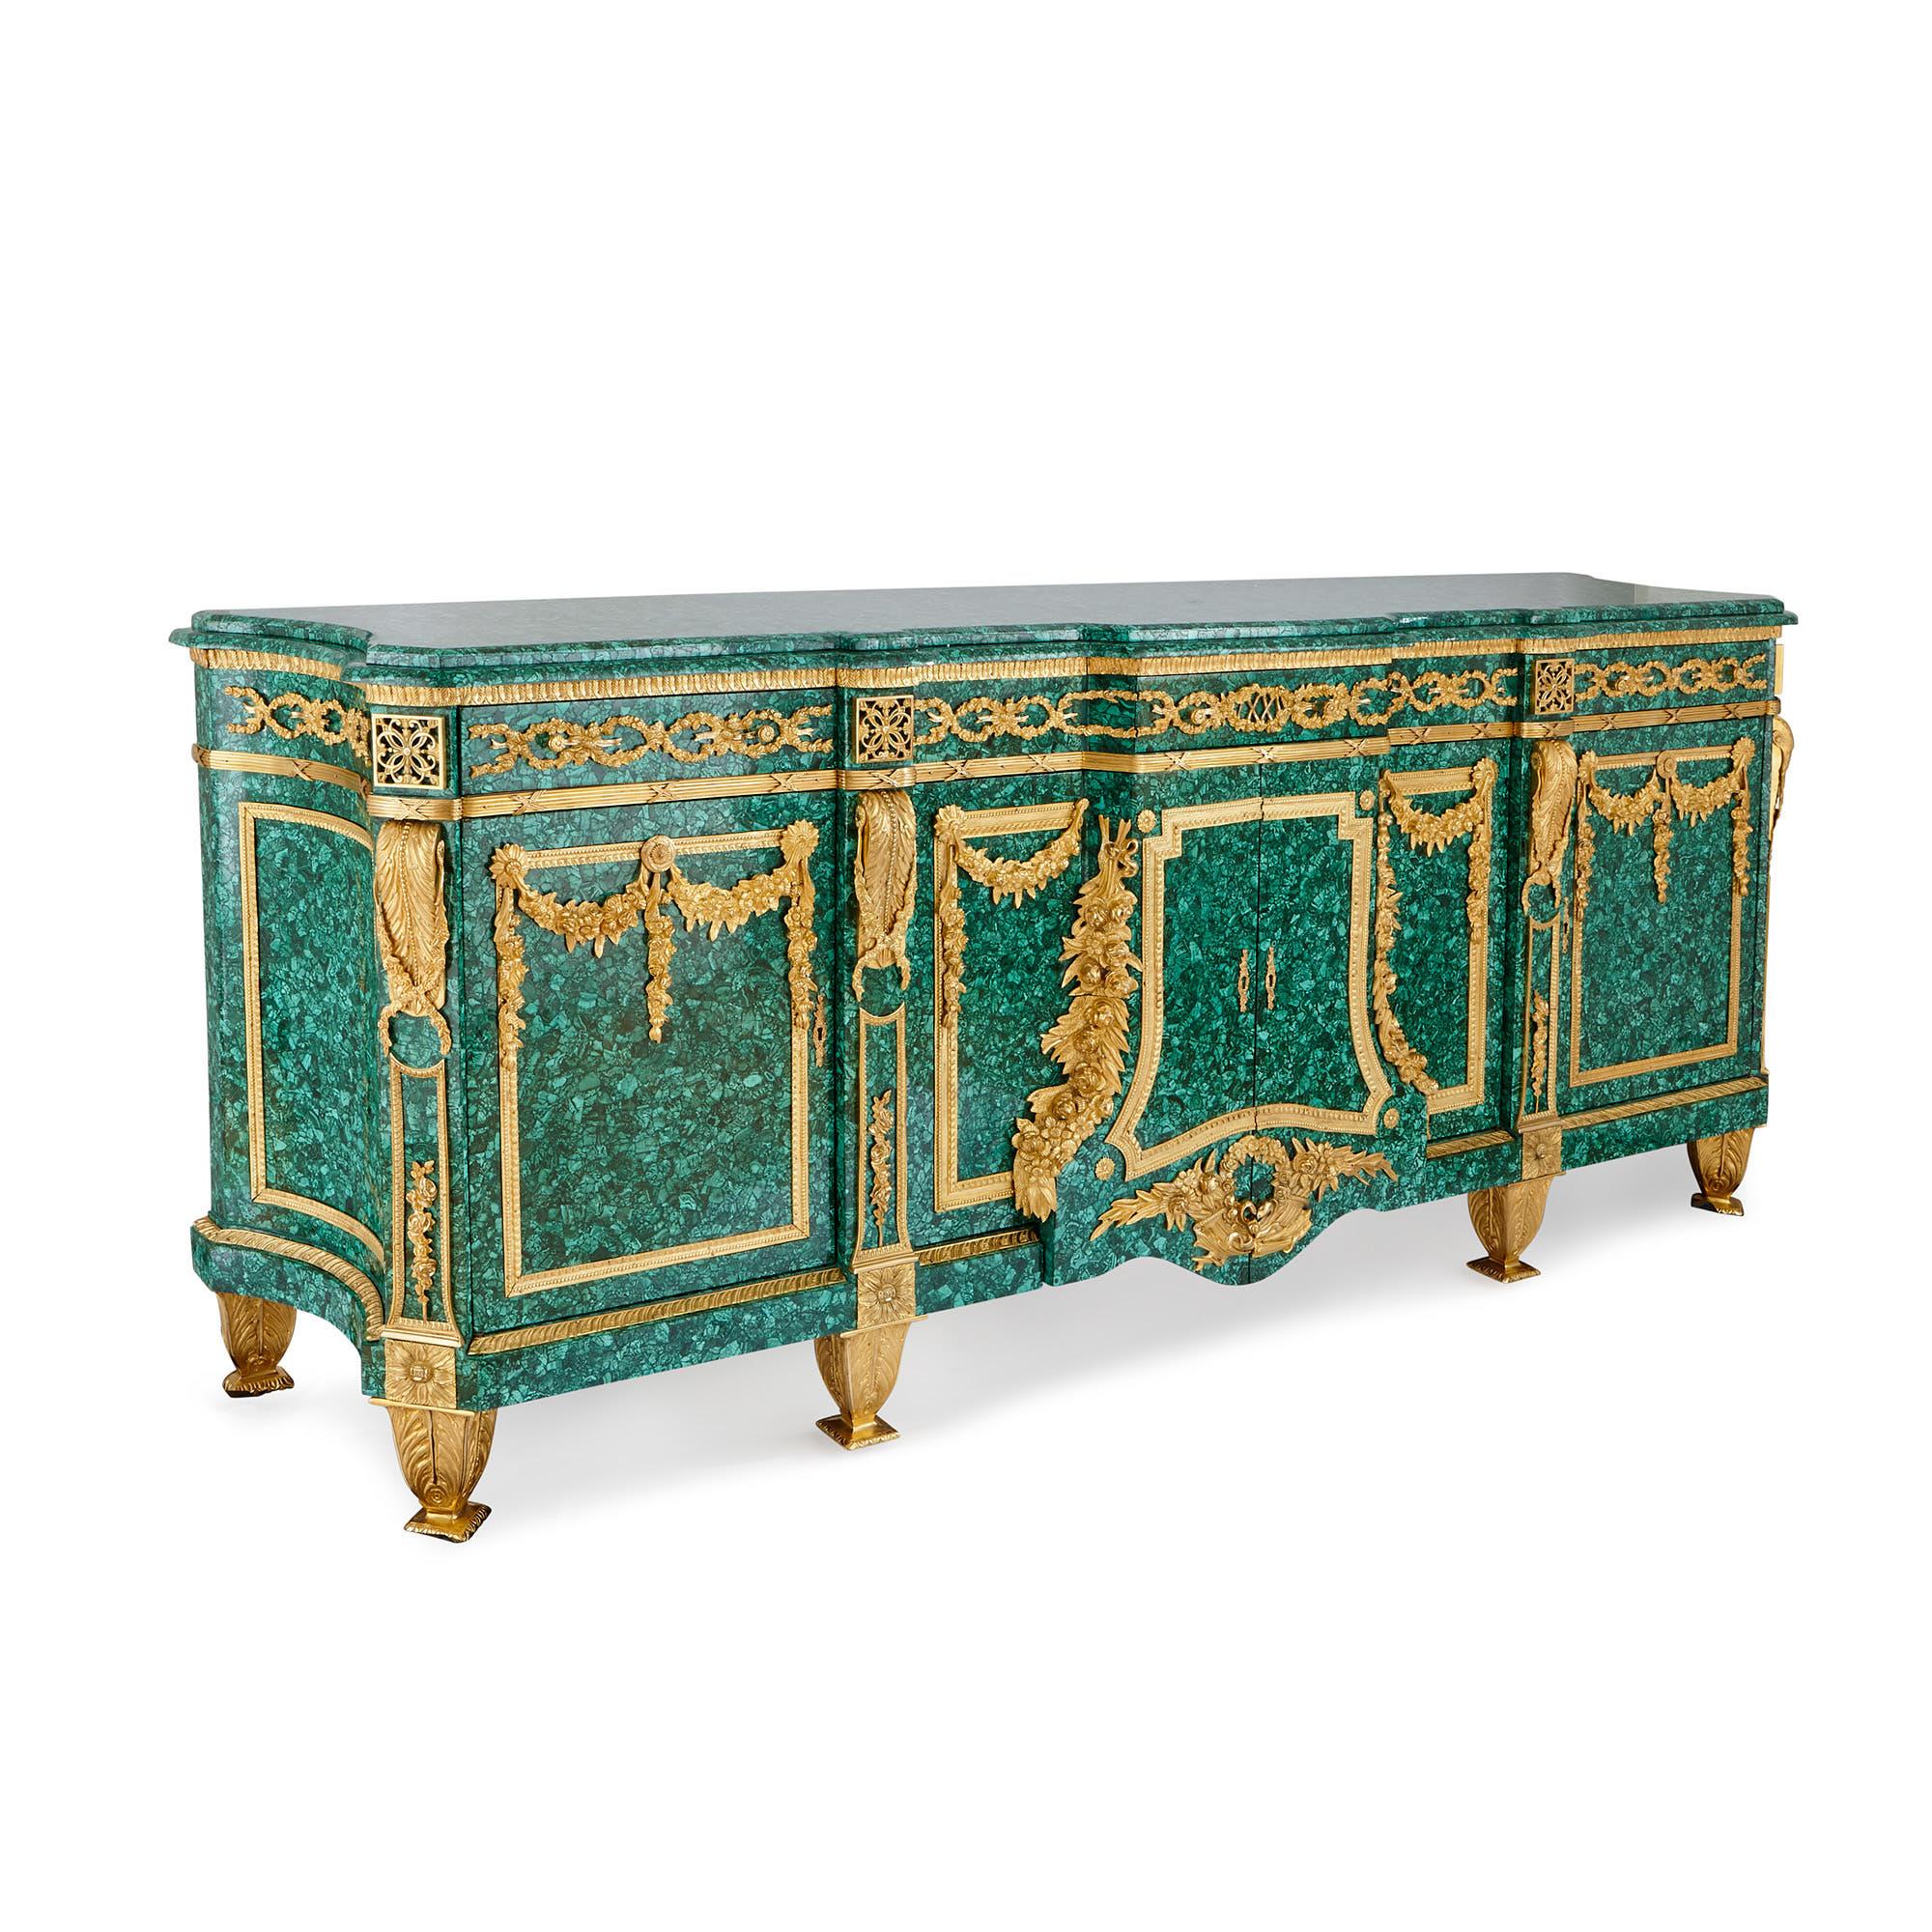 This fine and very large side cabinet is lavish in both design and materials, featuring a bright green malachite gemstone veneer (a later addition) and lustrous gilt bronze mounts. The cabinet is of rectangular shape, being very wide and